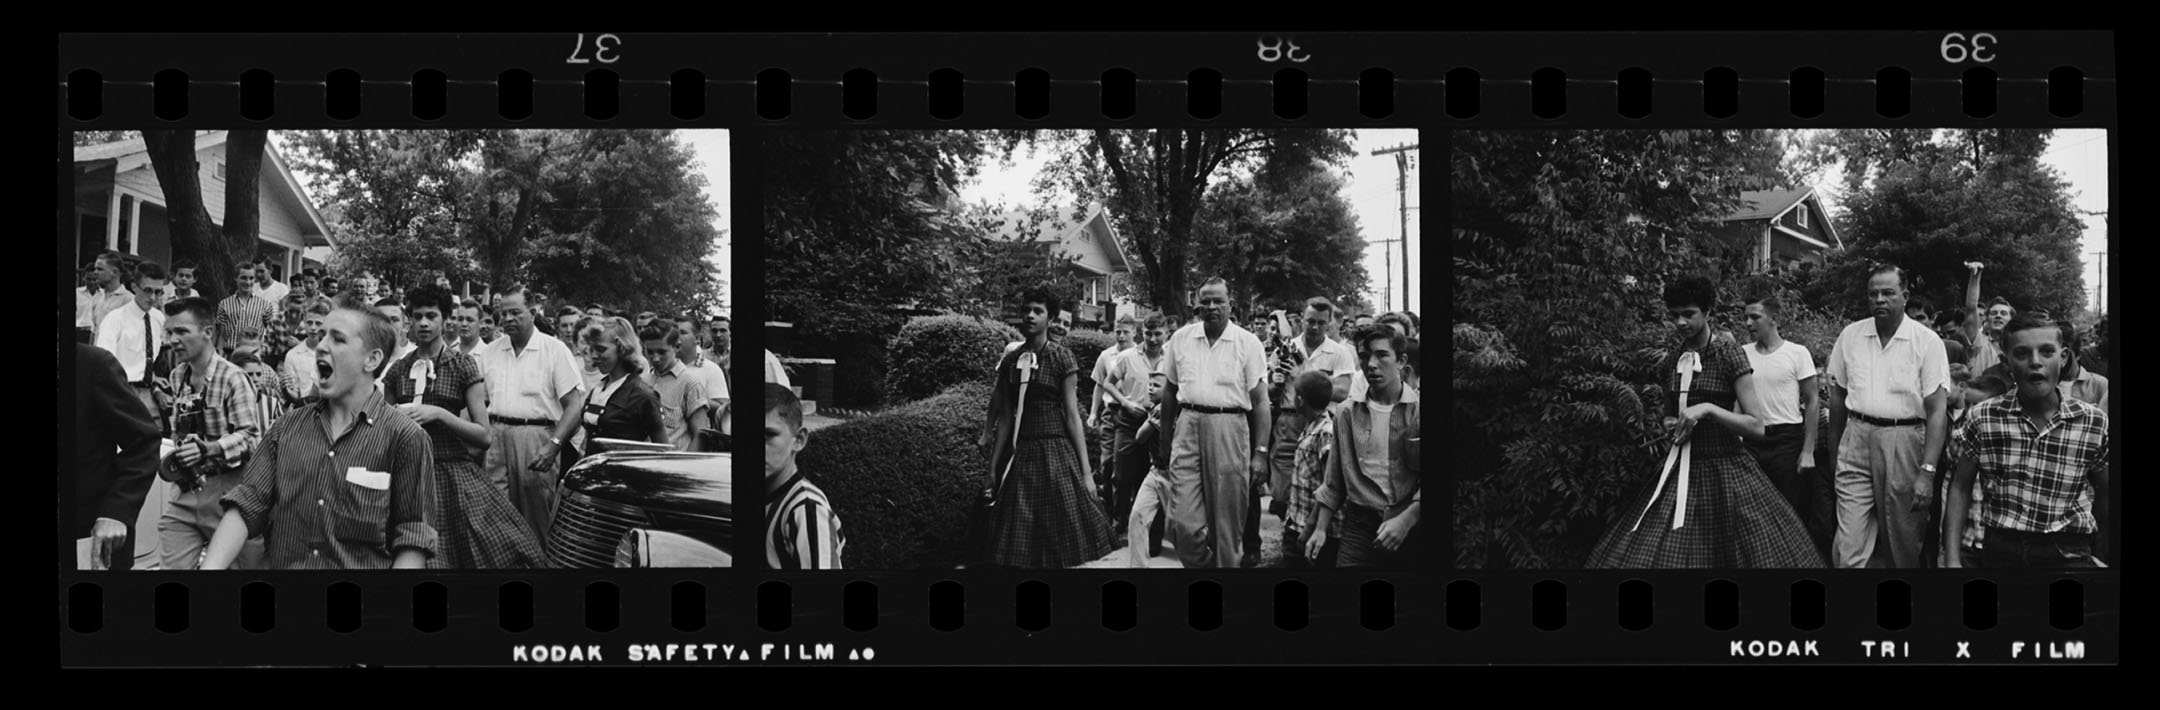 Integration at Harding High School in Charlotte, North Carolina, 4 September, 1957; P0070/0051_01, black and white 35 mm roll film negatives, in the Don Sturkey Photographic Materials #P0070, North Carolina Collection Photographic Archives, The Wilson Library, University of North Carolina at Chapel Hill.